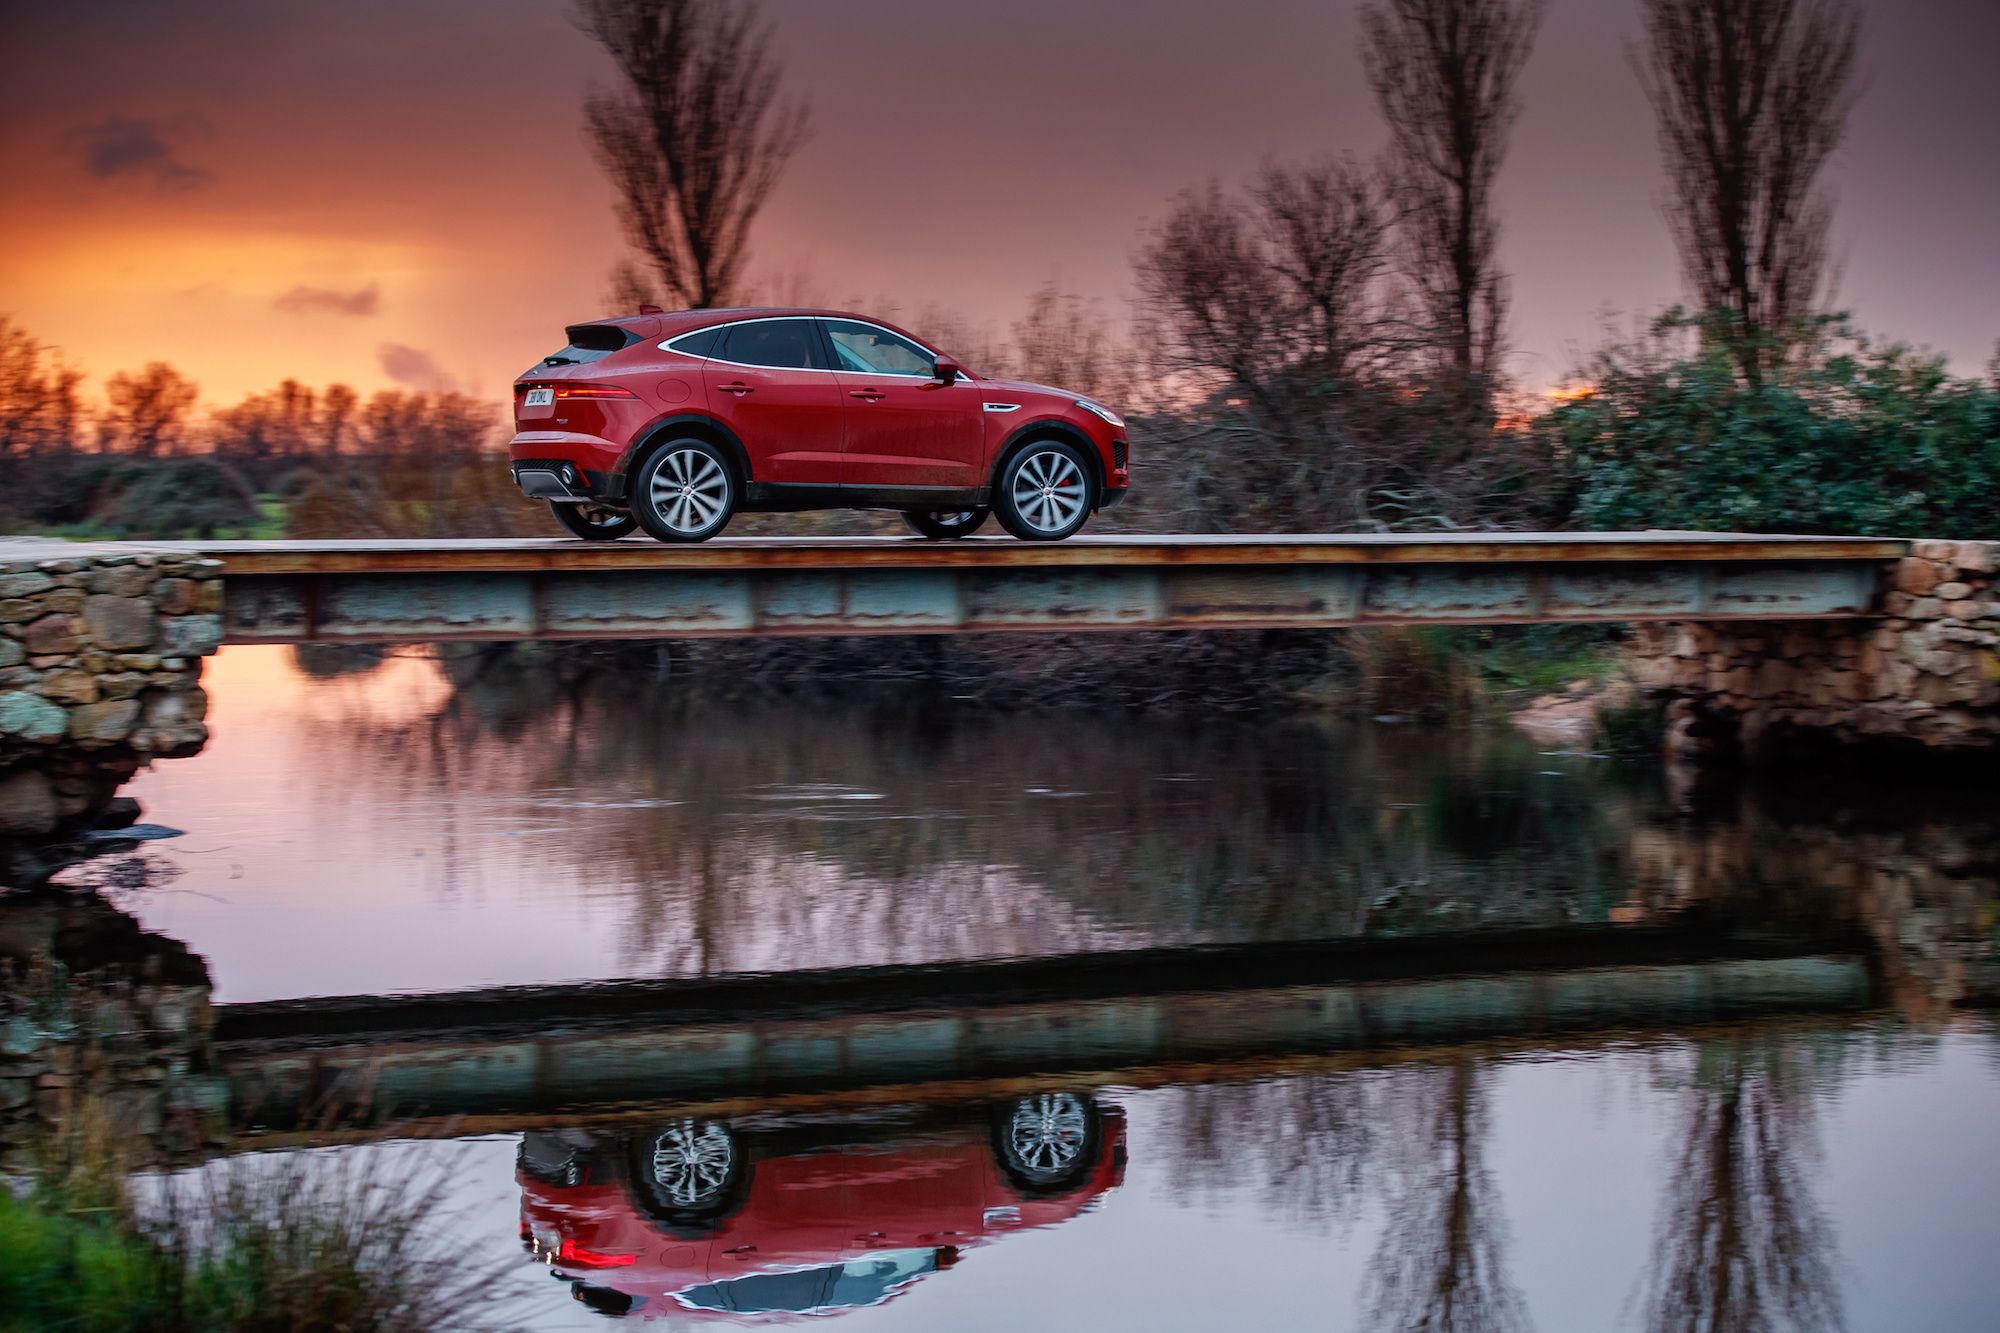 Here’s how Jaguar has set the new E-Pace apart from its elite SUV competitors